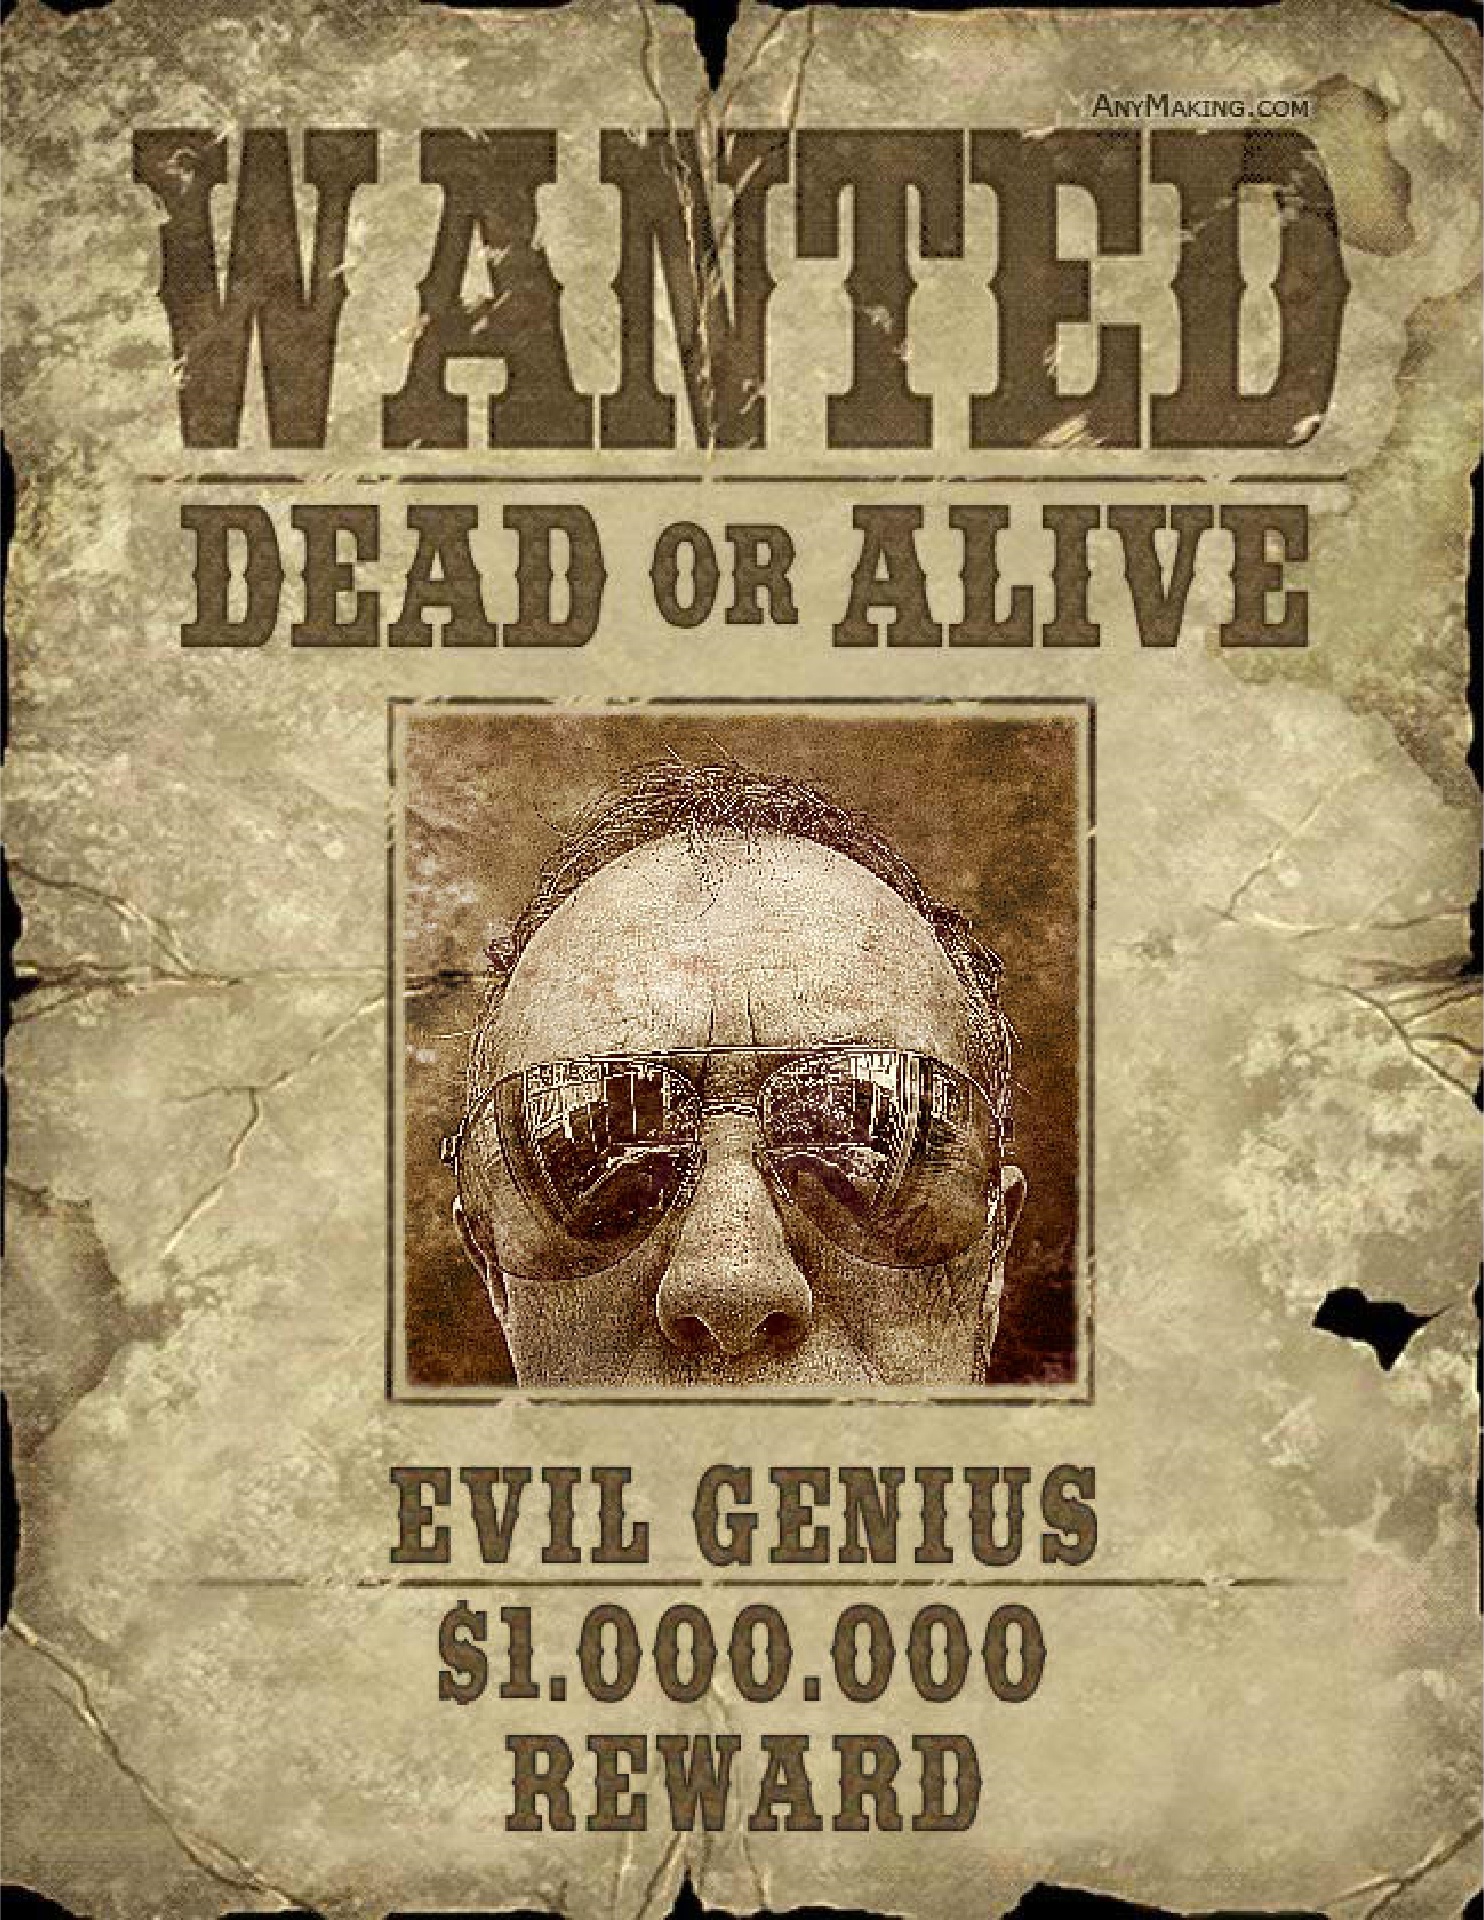 wanted man dead free photo